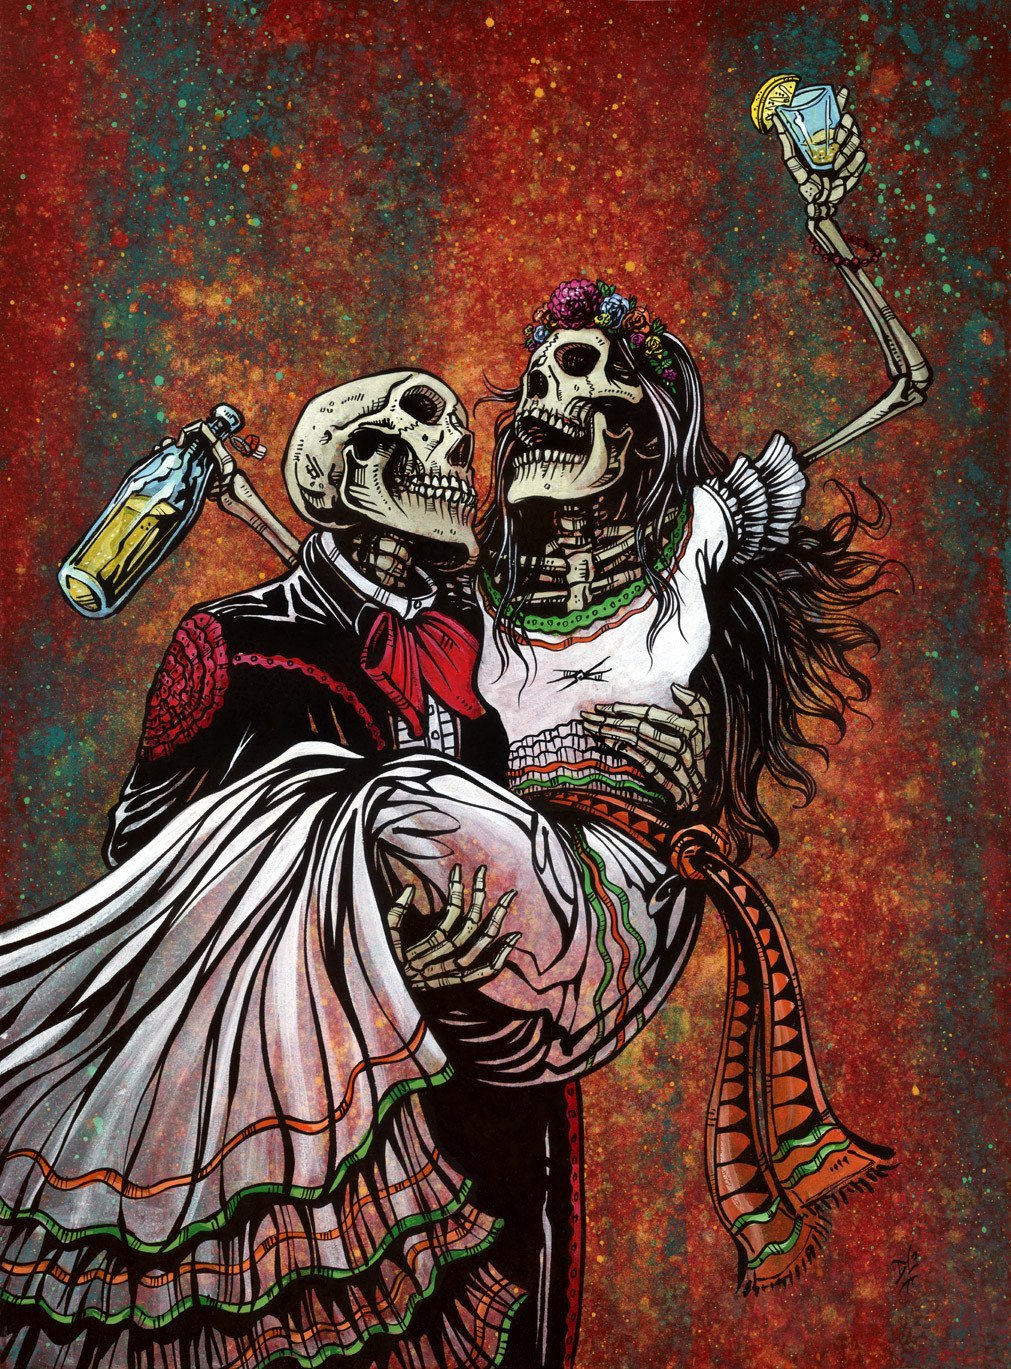 Bottoms Up by Day of the Dead Artist David Lozeau